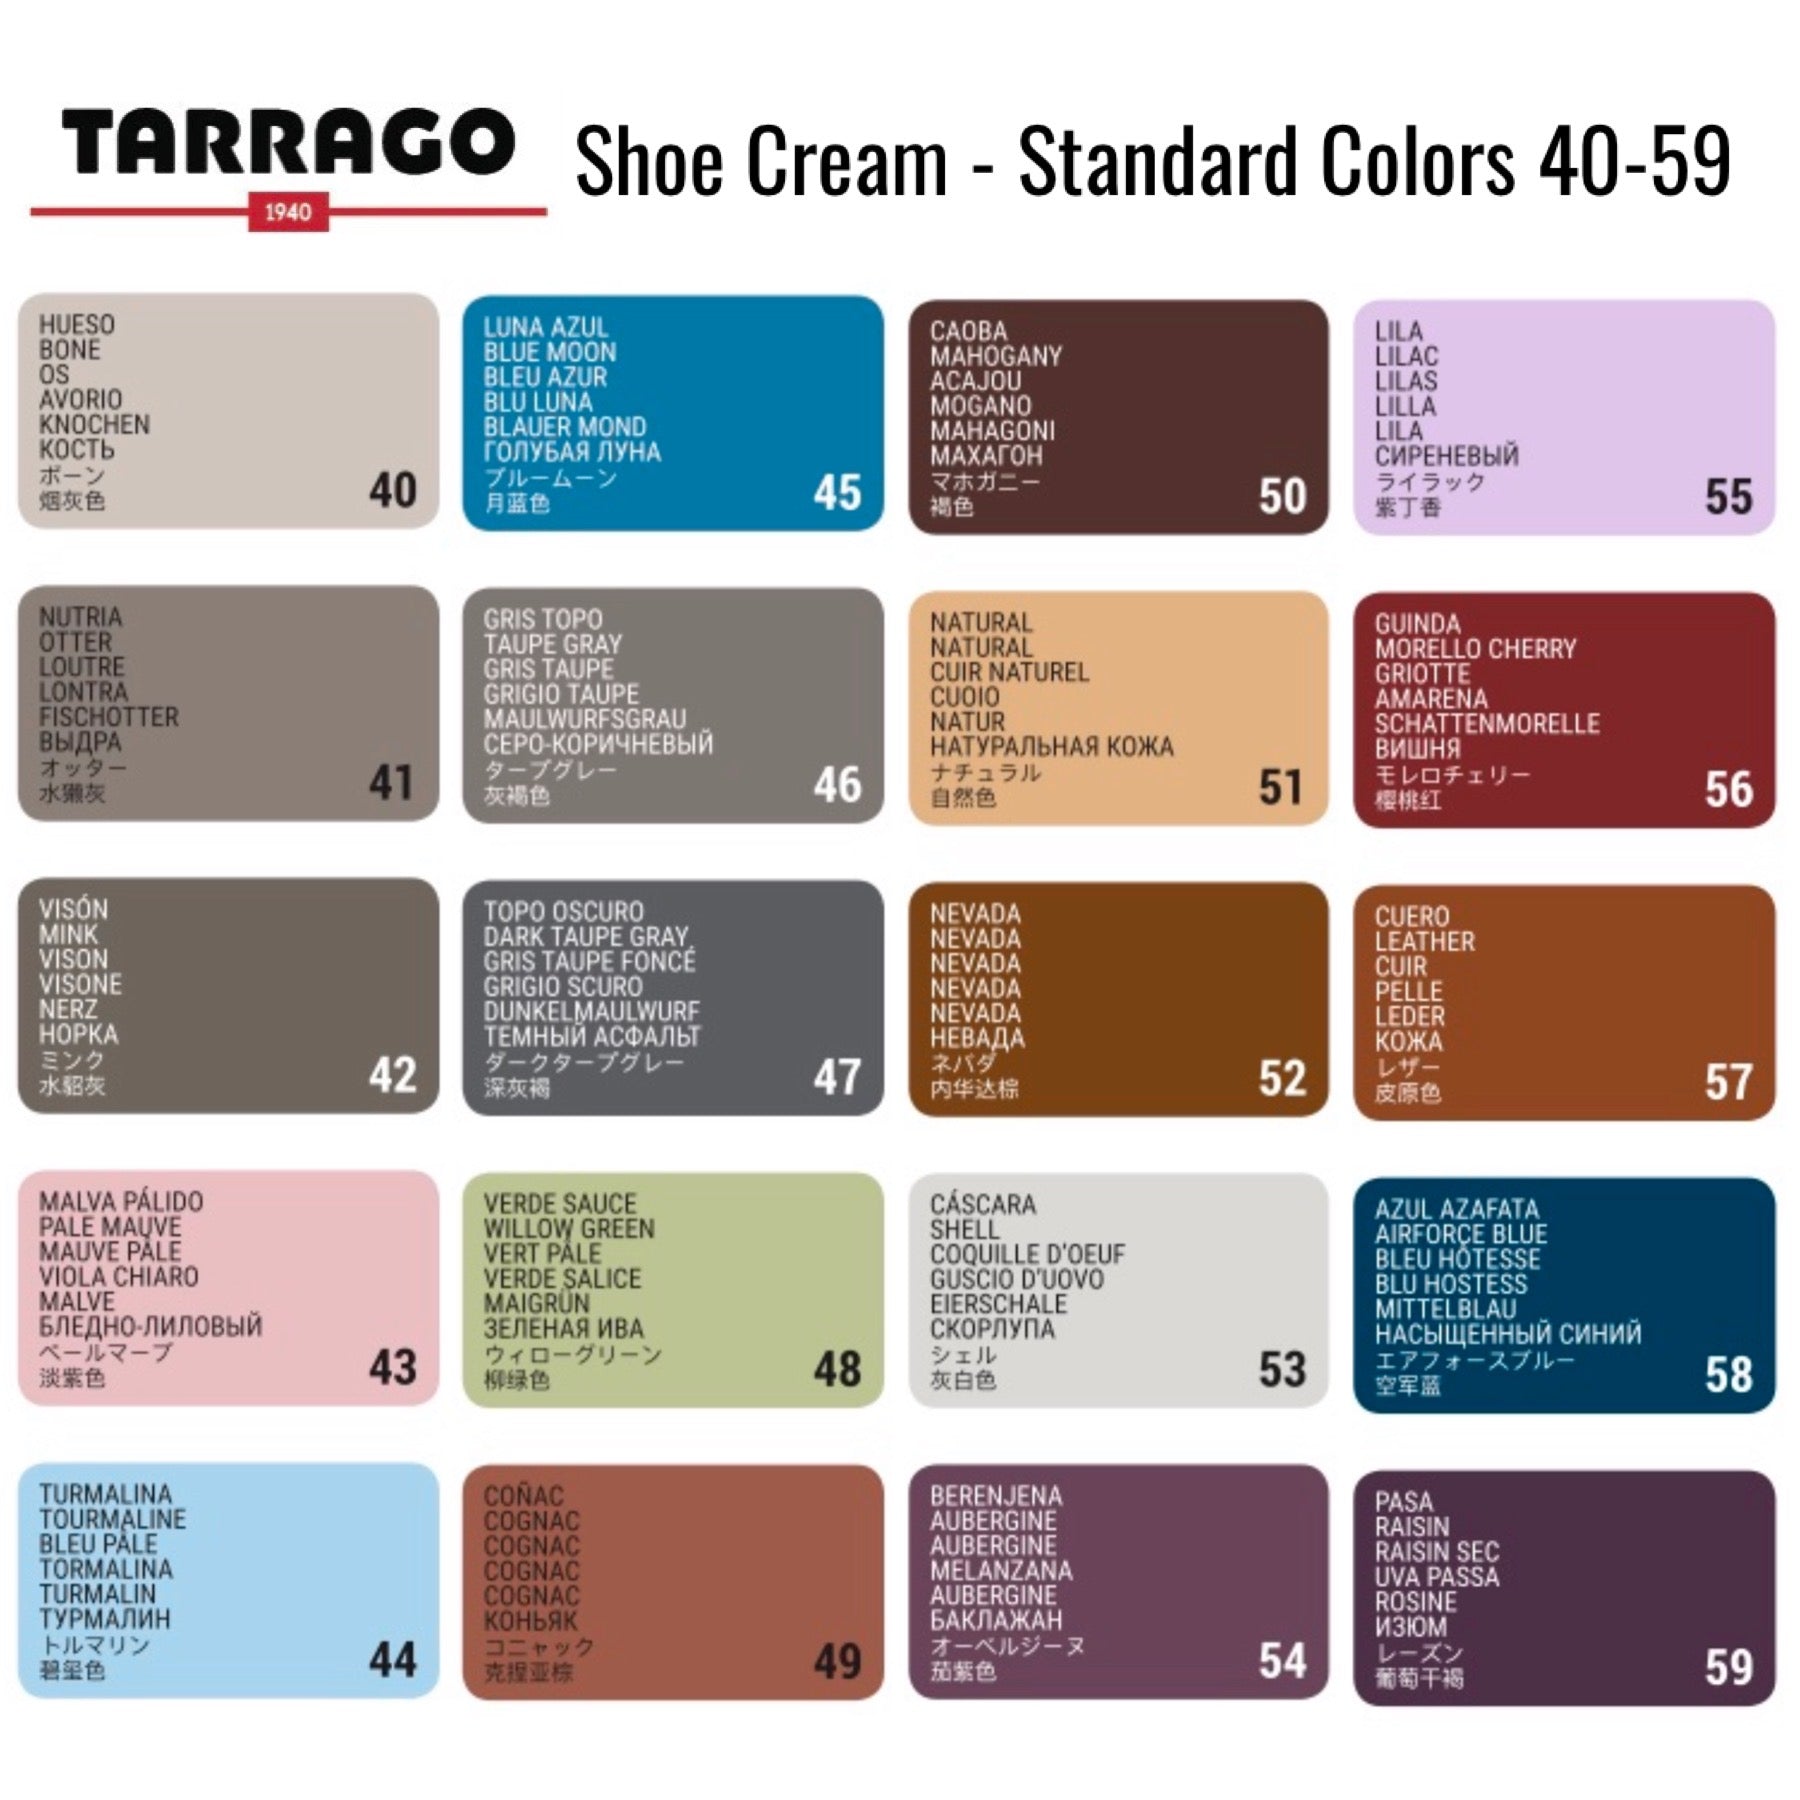 Tarrago Dye: How to Dye Your Leather Shoes 